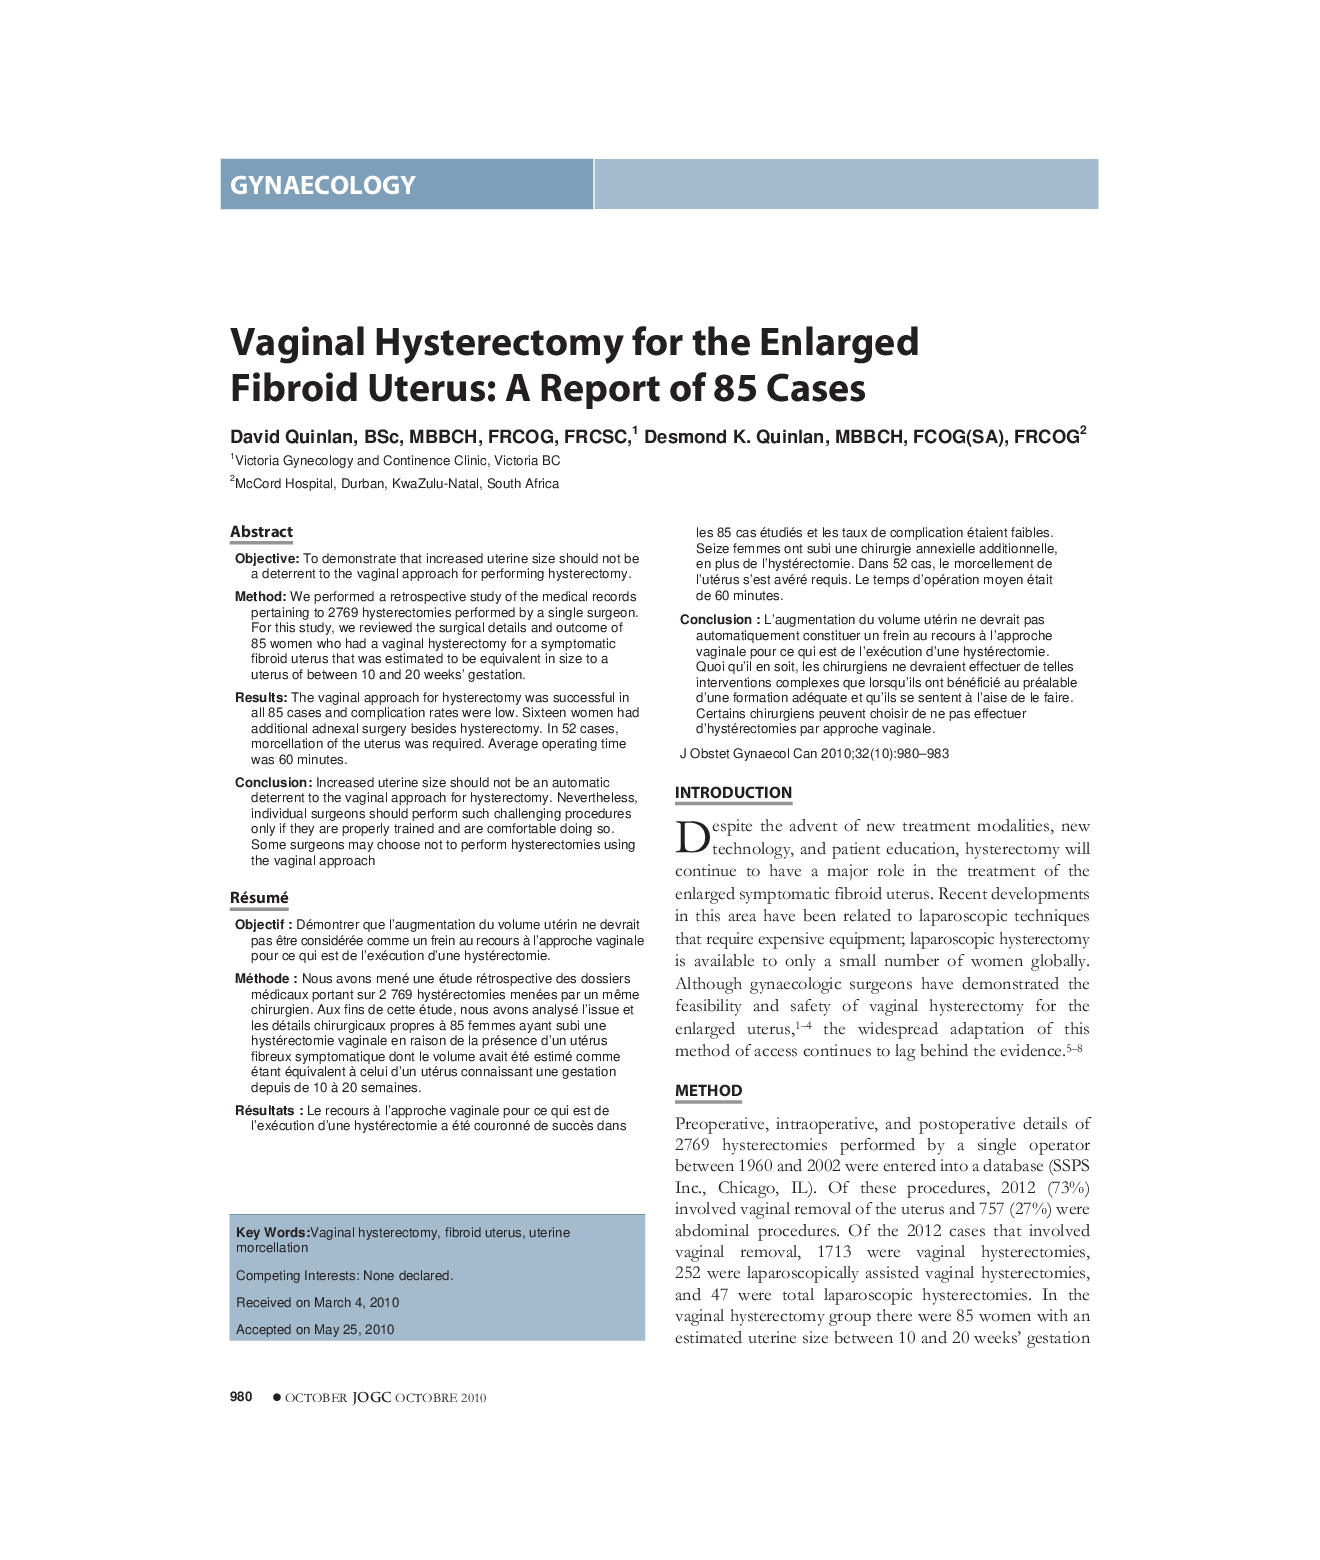 Vaginal Hysterectomy for the Enlarged Fibroid Uterus: A Report of 85 Cases